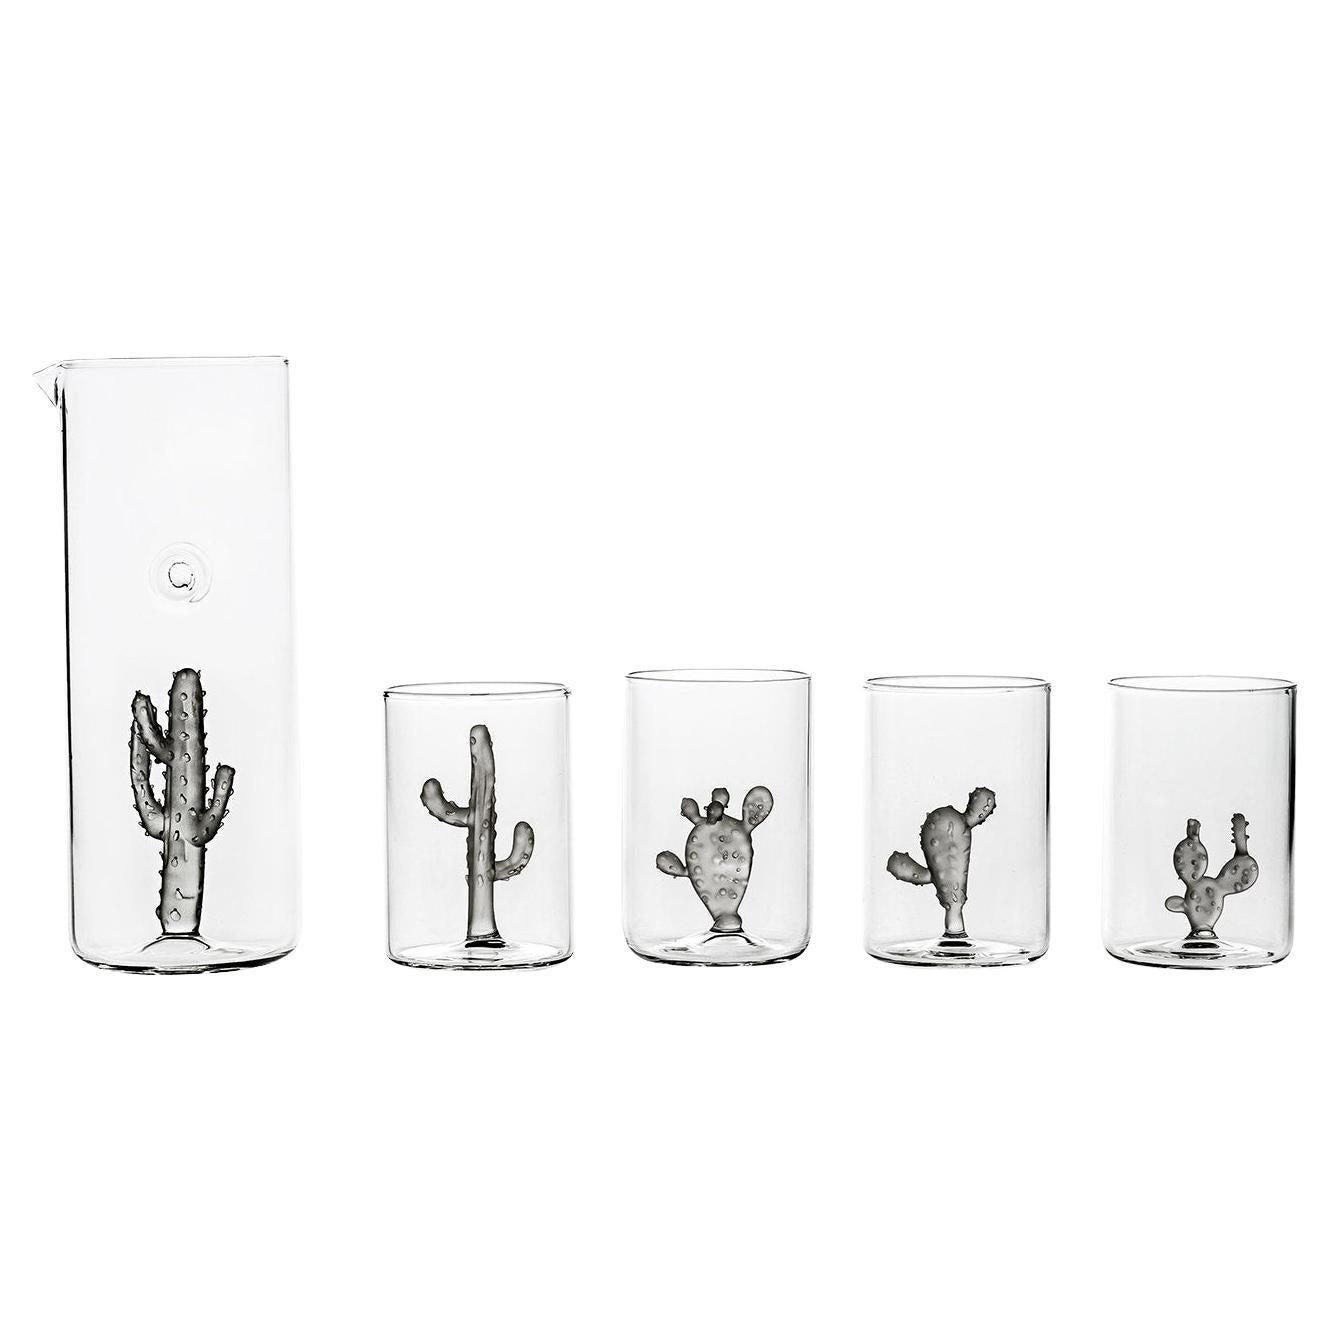 Set of 4 Glasses and 1 Jug Cactus Collection For Sale